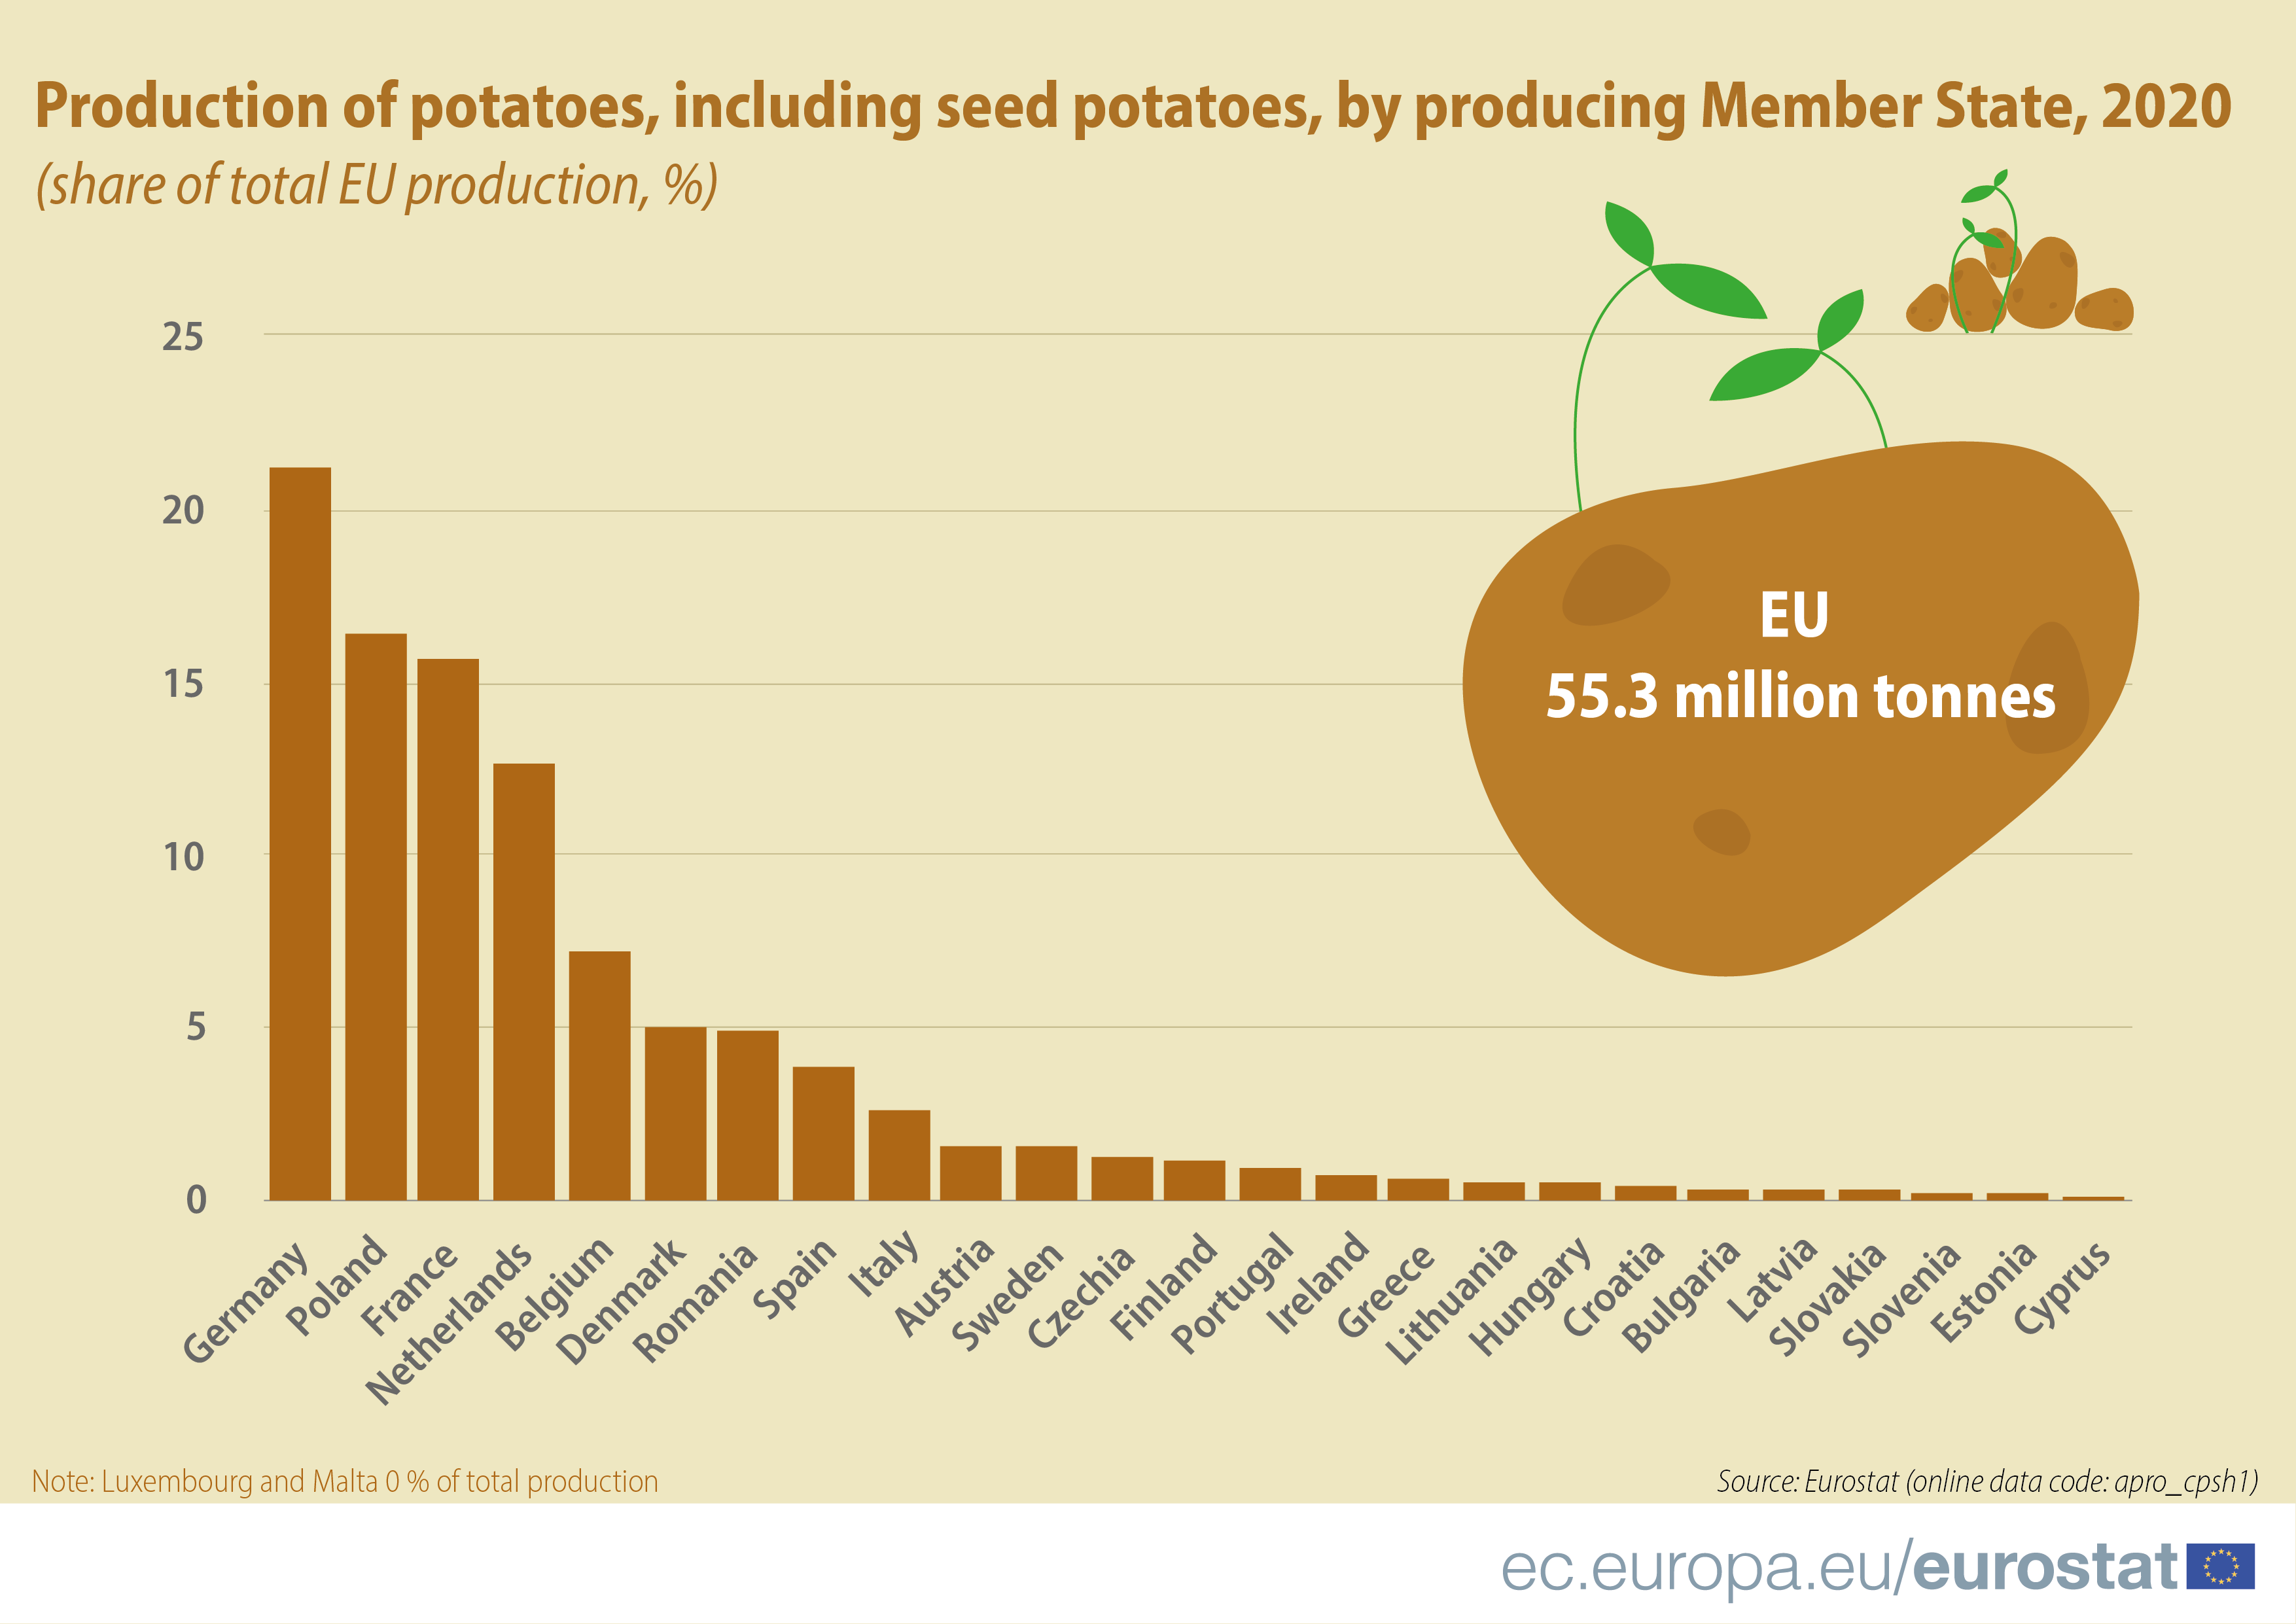 Bar chart: Production of potatoes, including seed potatoes by producing Member State, EU countries, 2020 data, as share of the total EU production